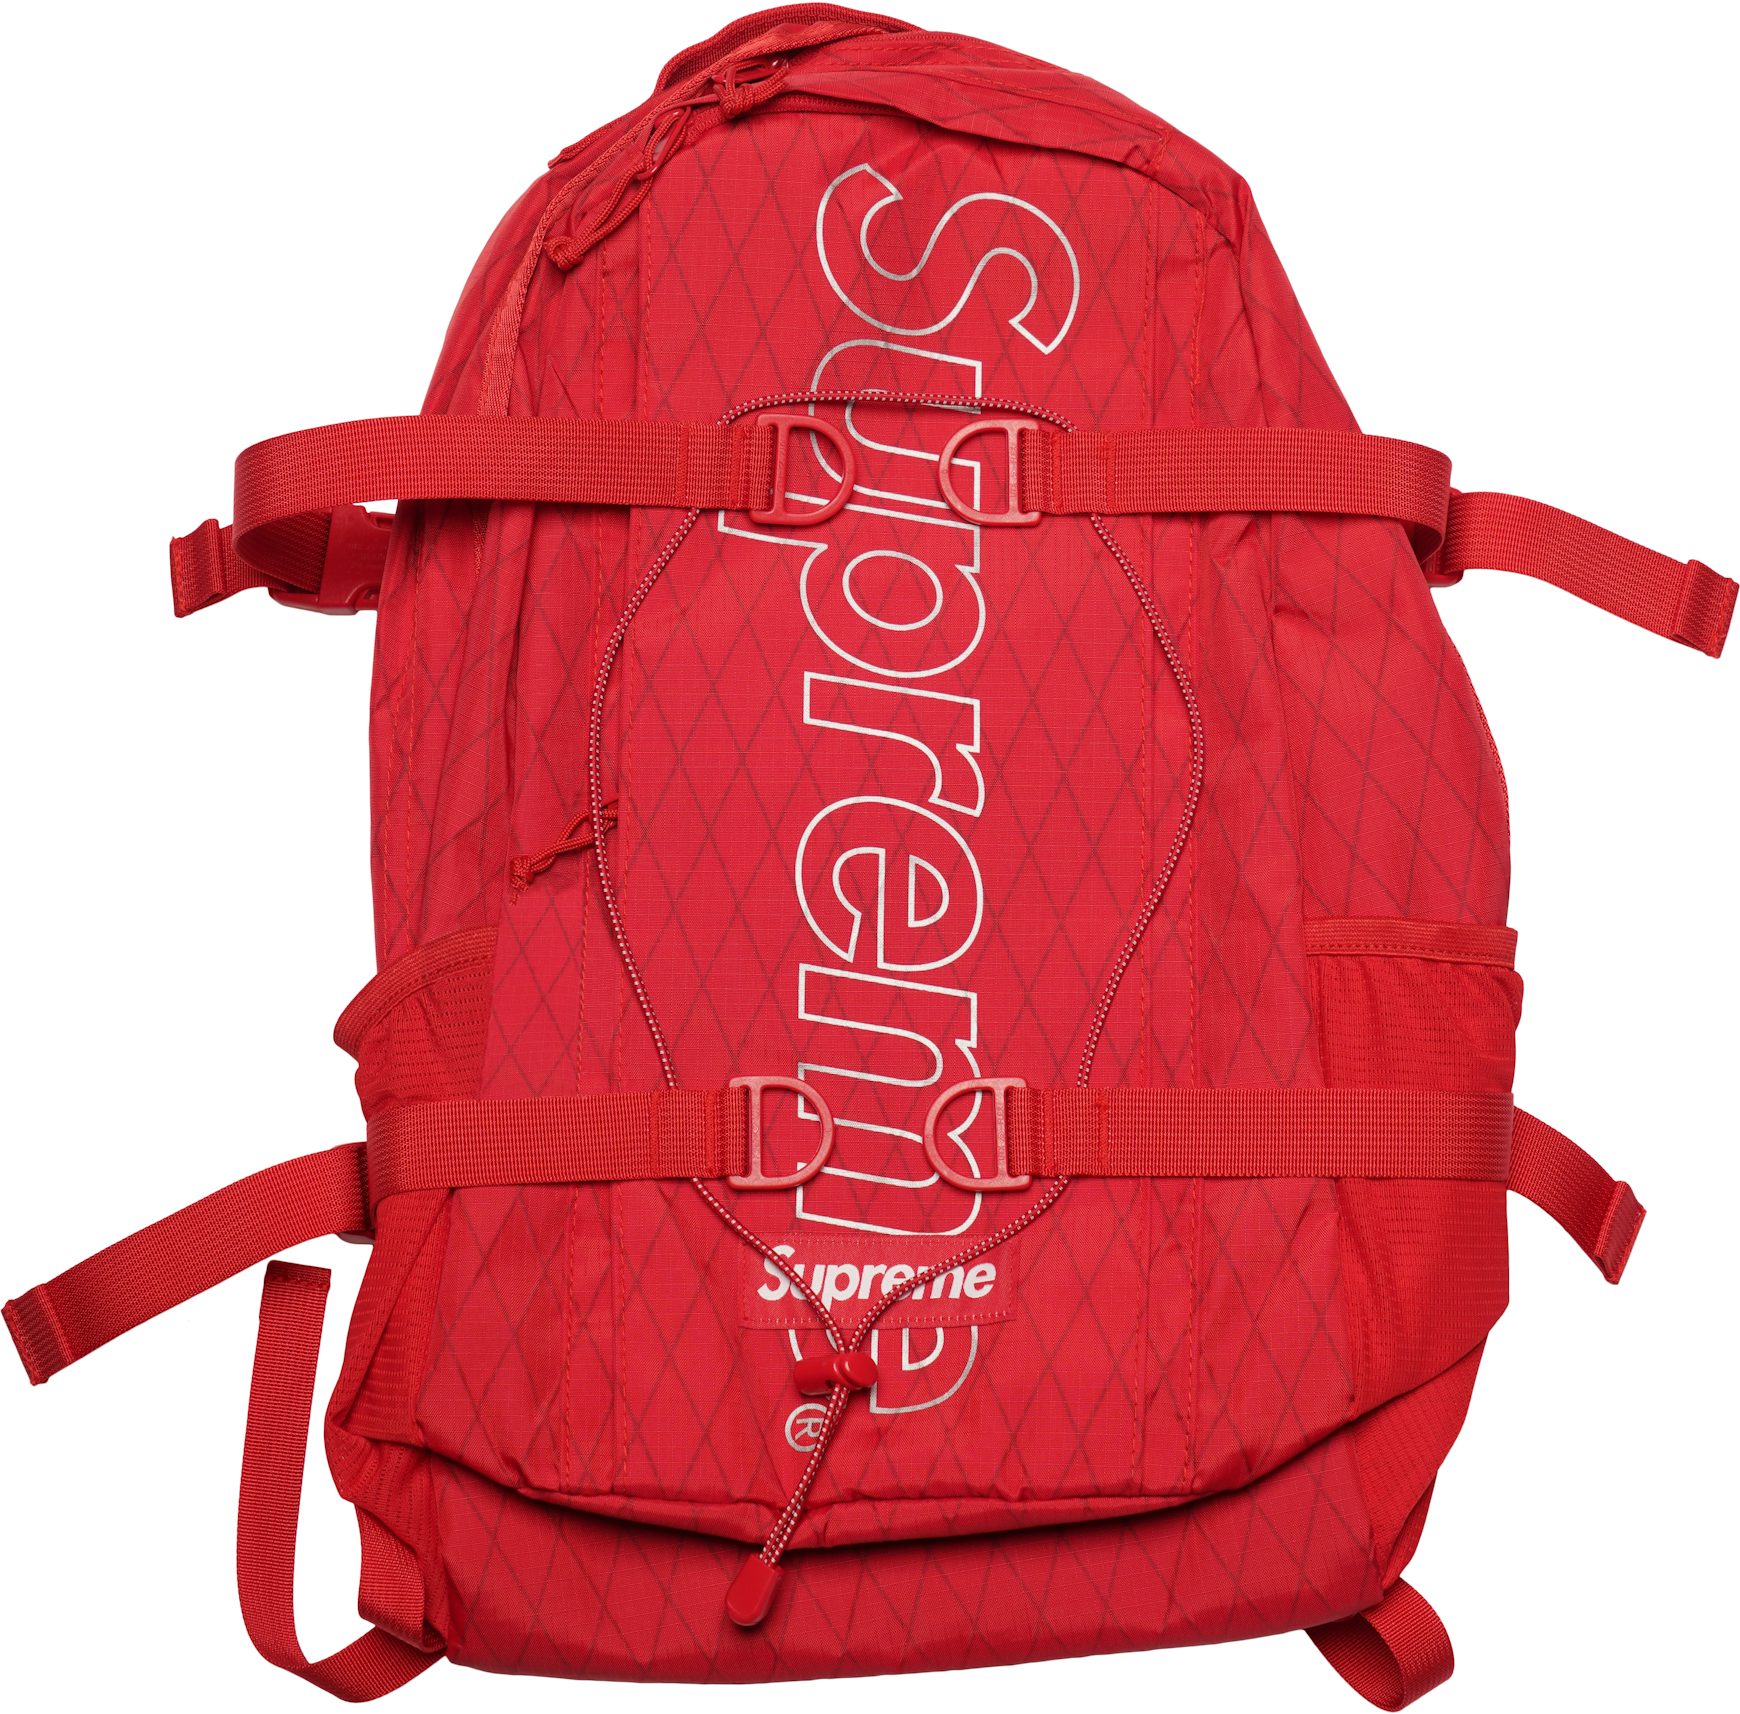 WTS] Supreme Backpack from SS17 - 8.5/10 condition - $150 shipped :  r/supremeclothing